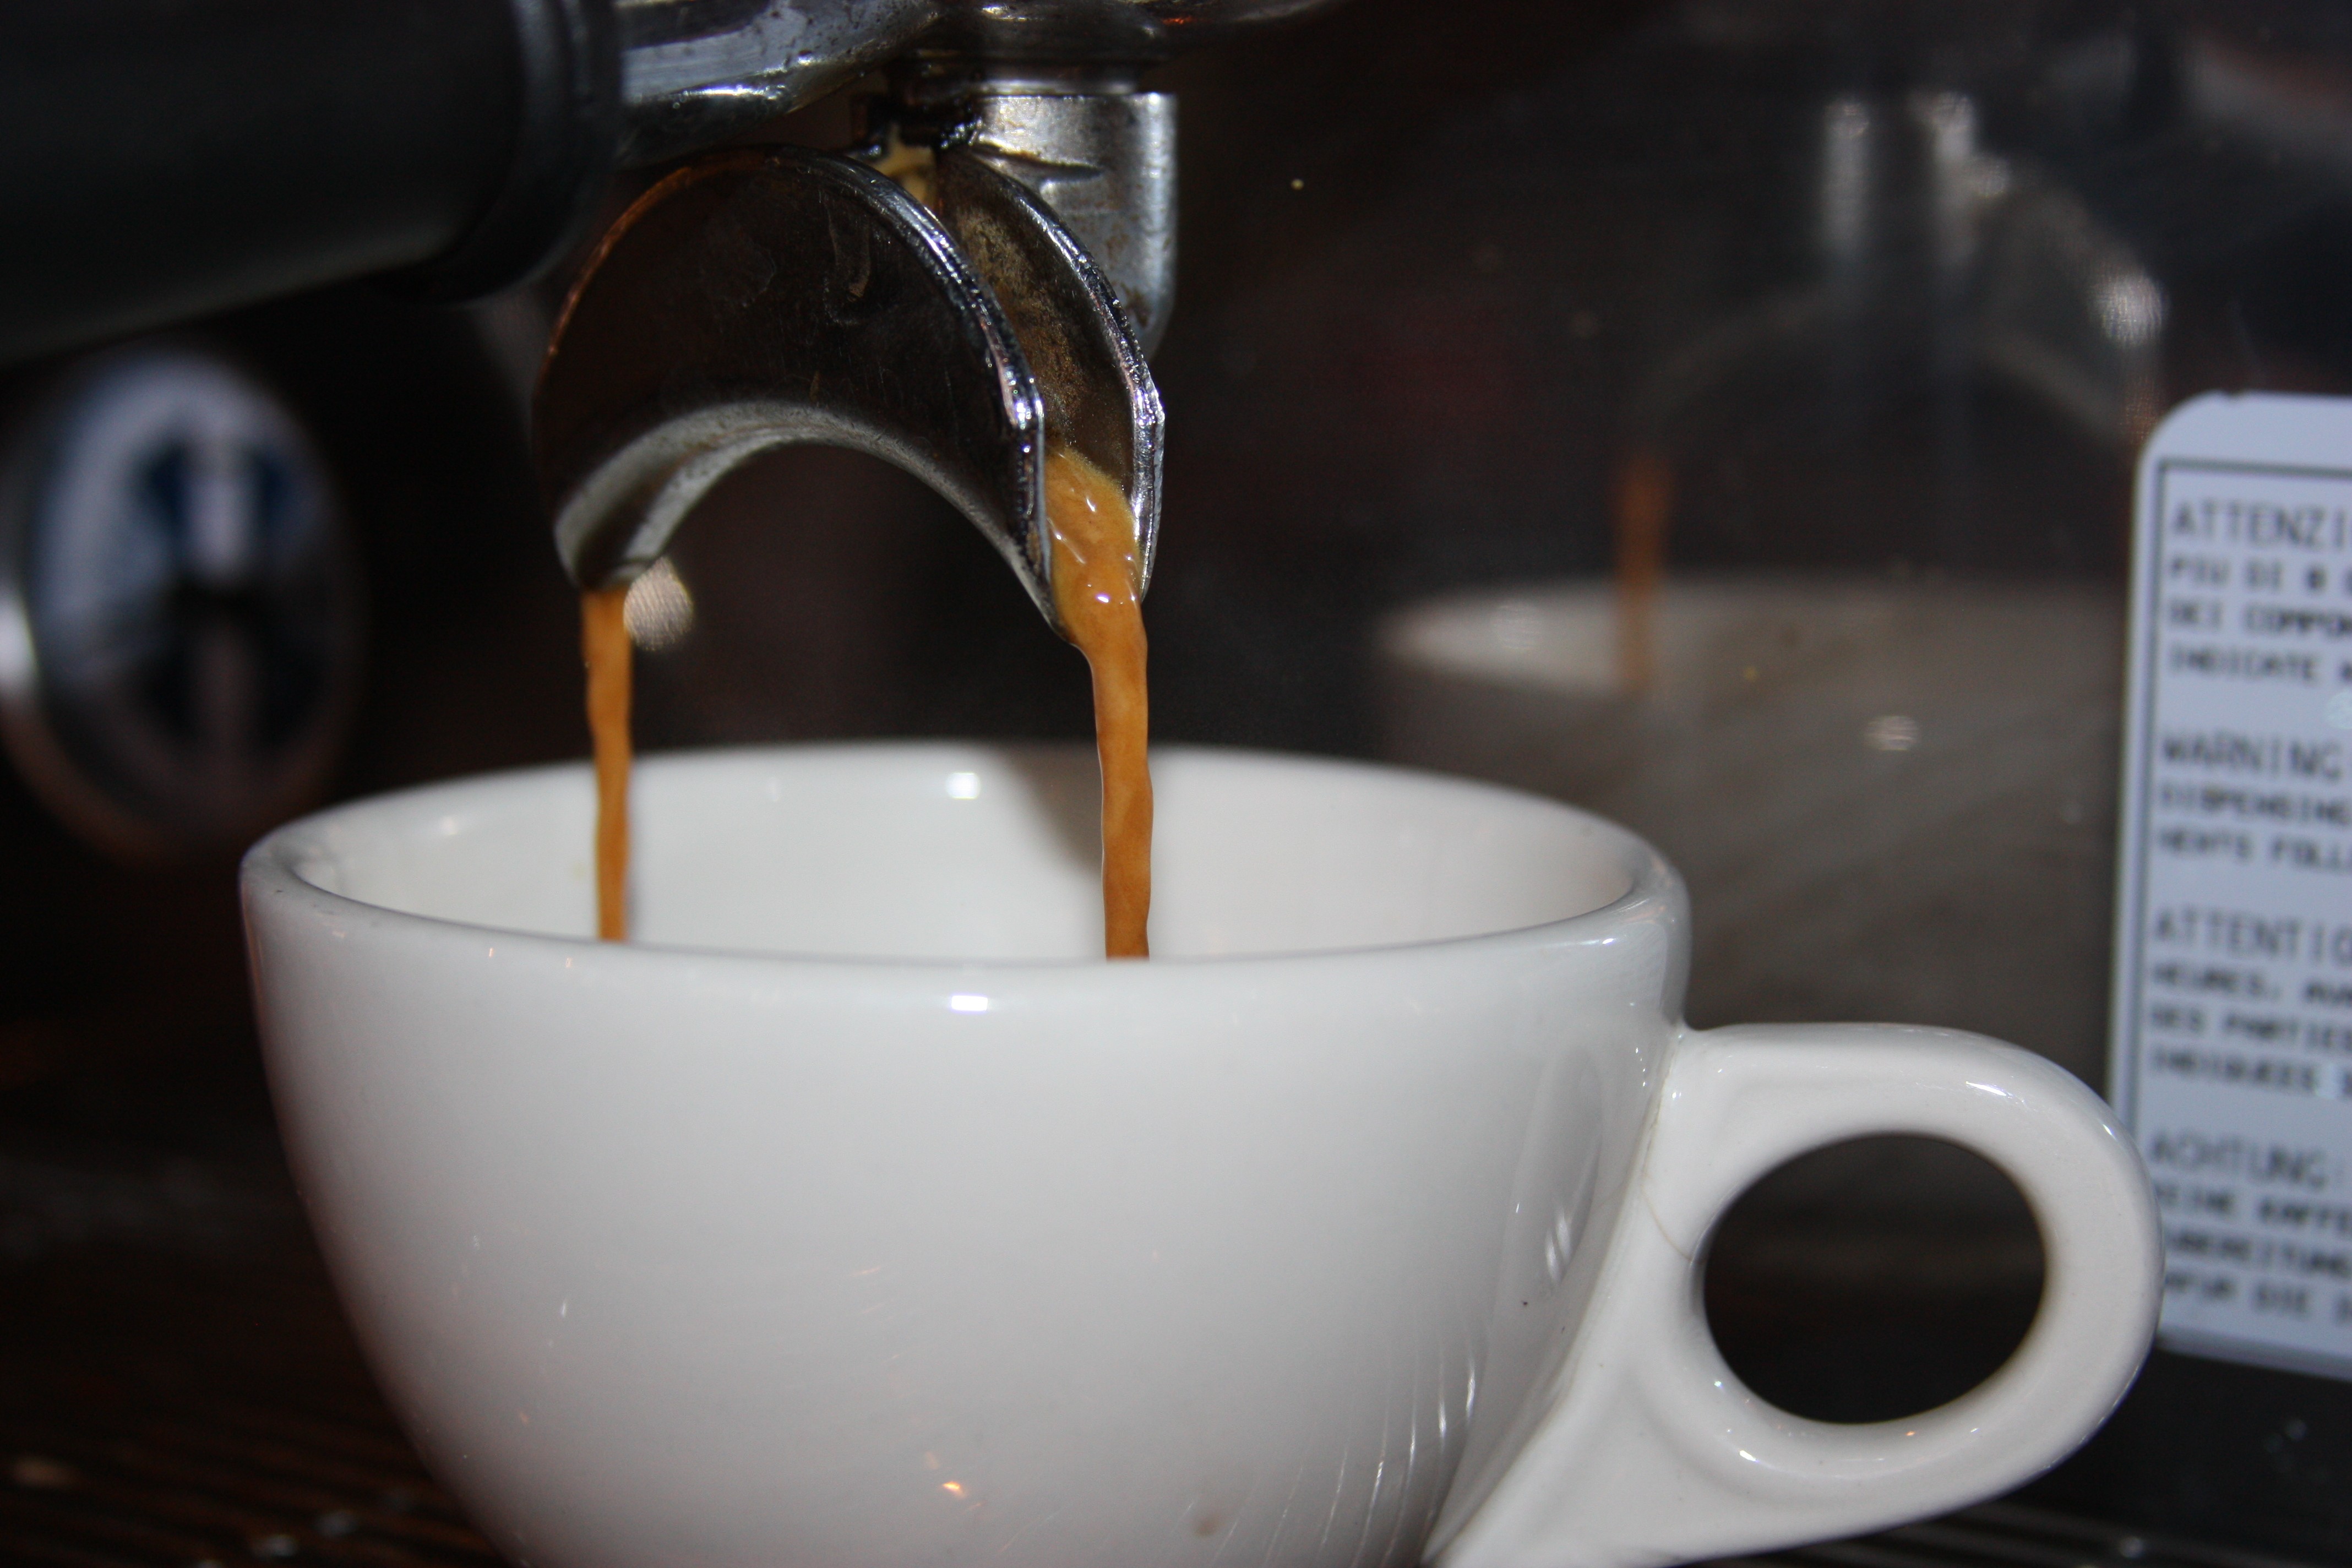 Double shot of espresso pours from a portafilter into an ivory cup.